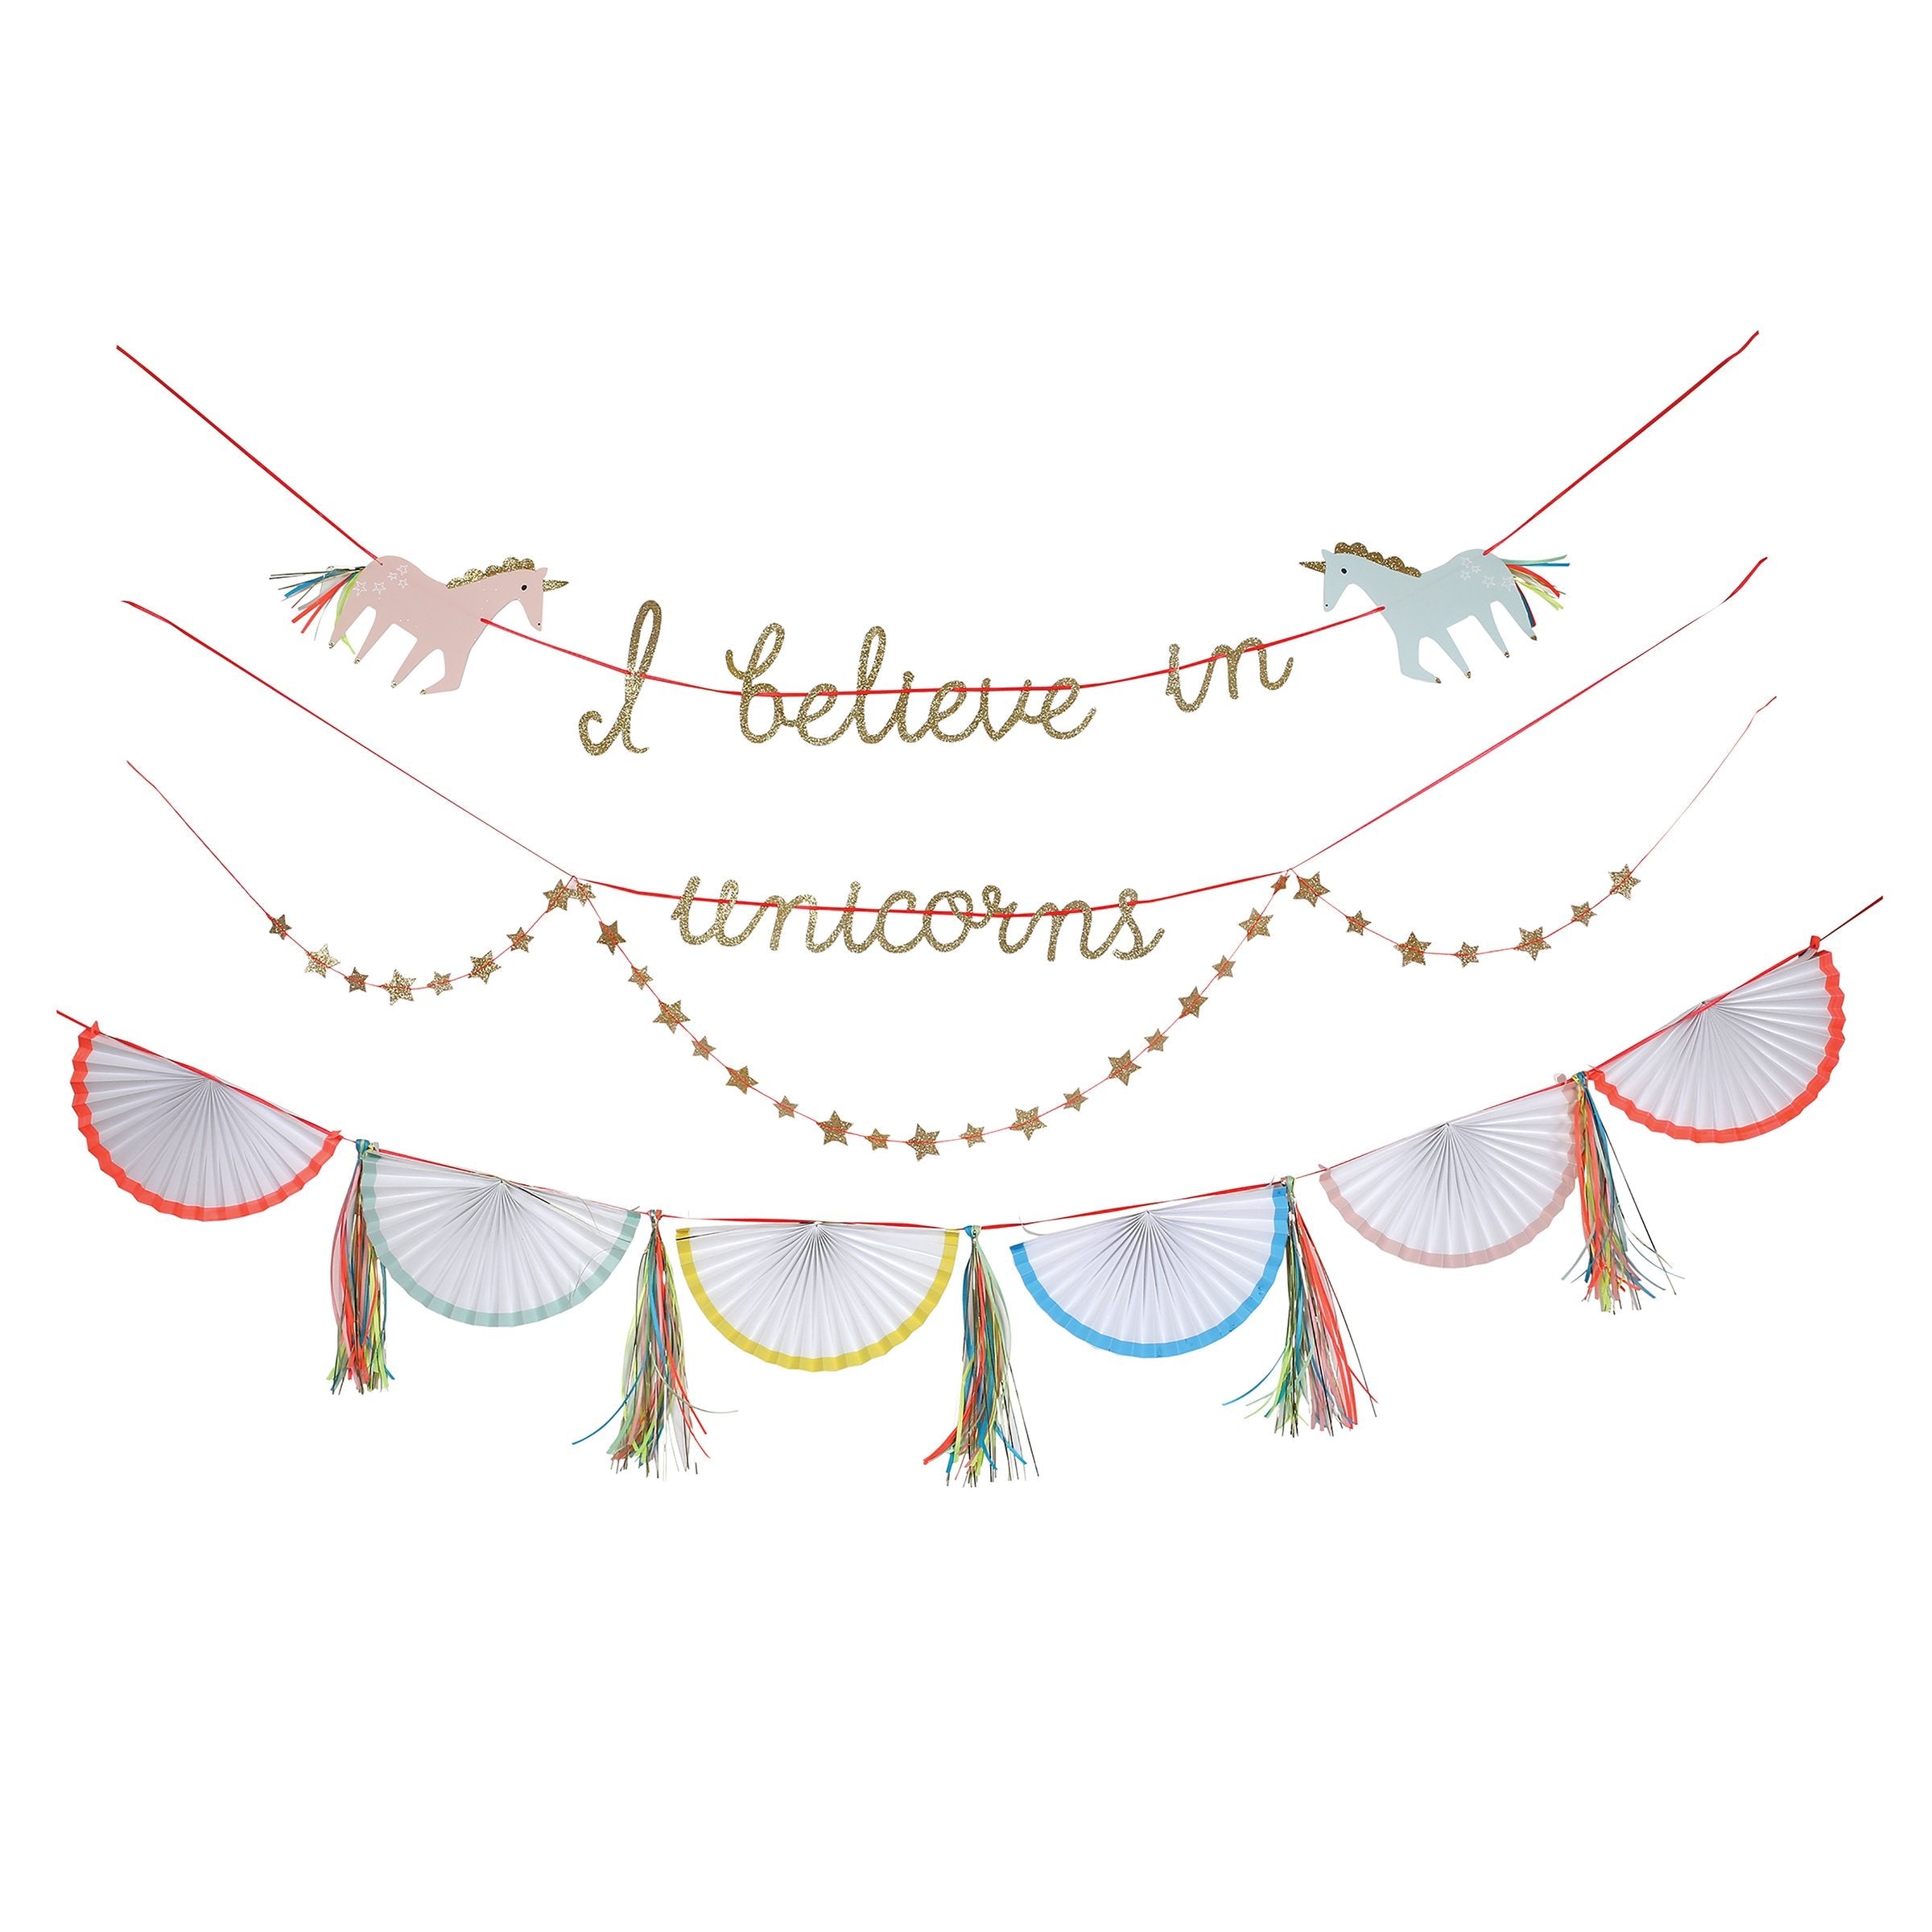 This wonderful unicorn party decoration include pastel unicorns, gold glitter, ribbons and the words "I Believe in Unicorns".